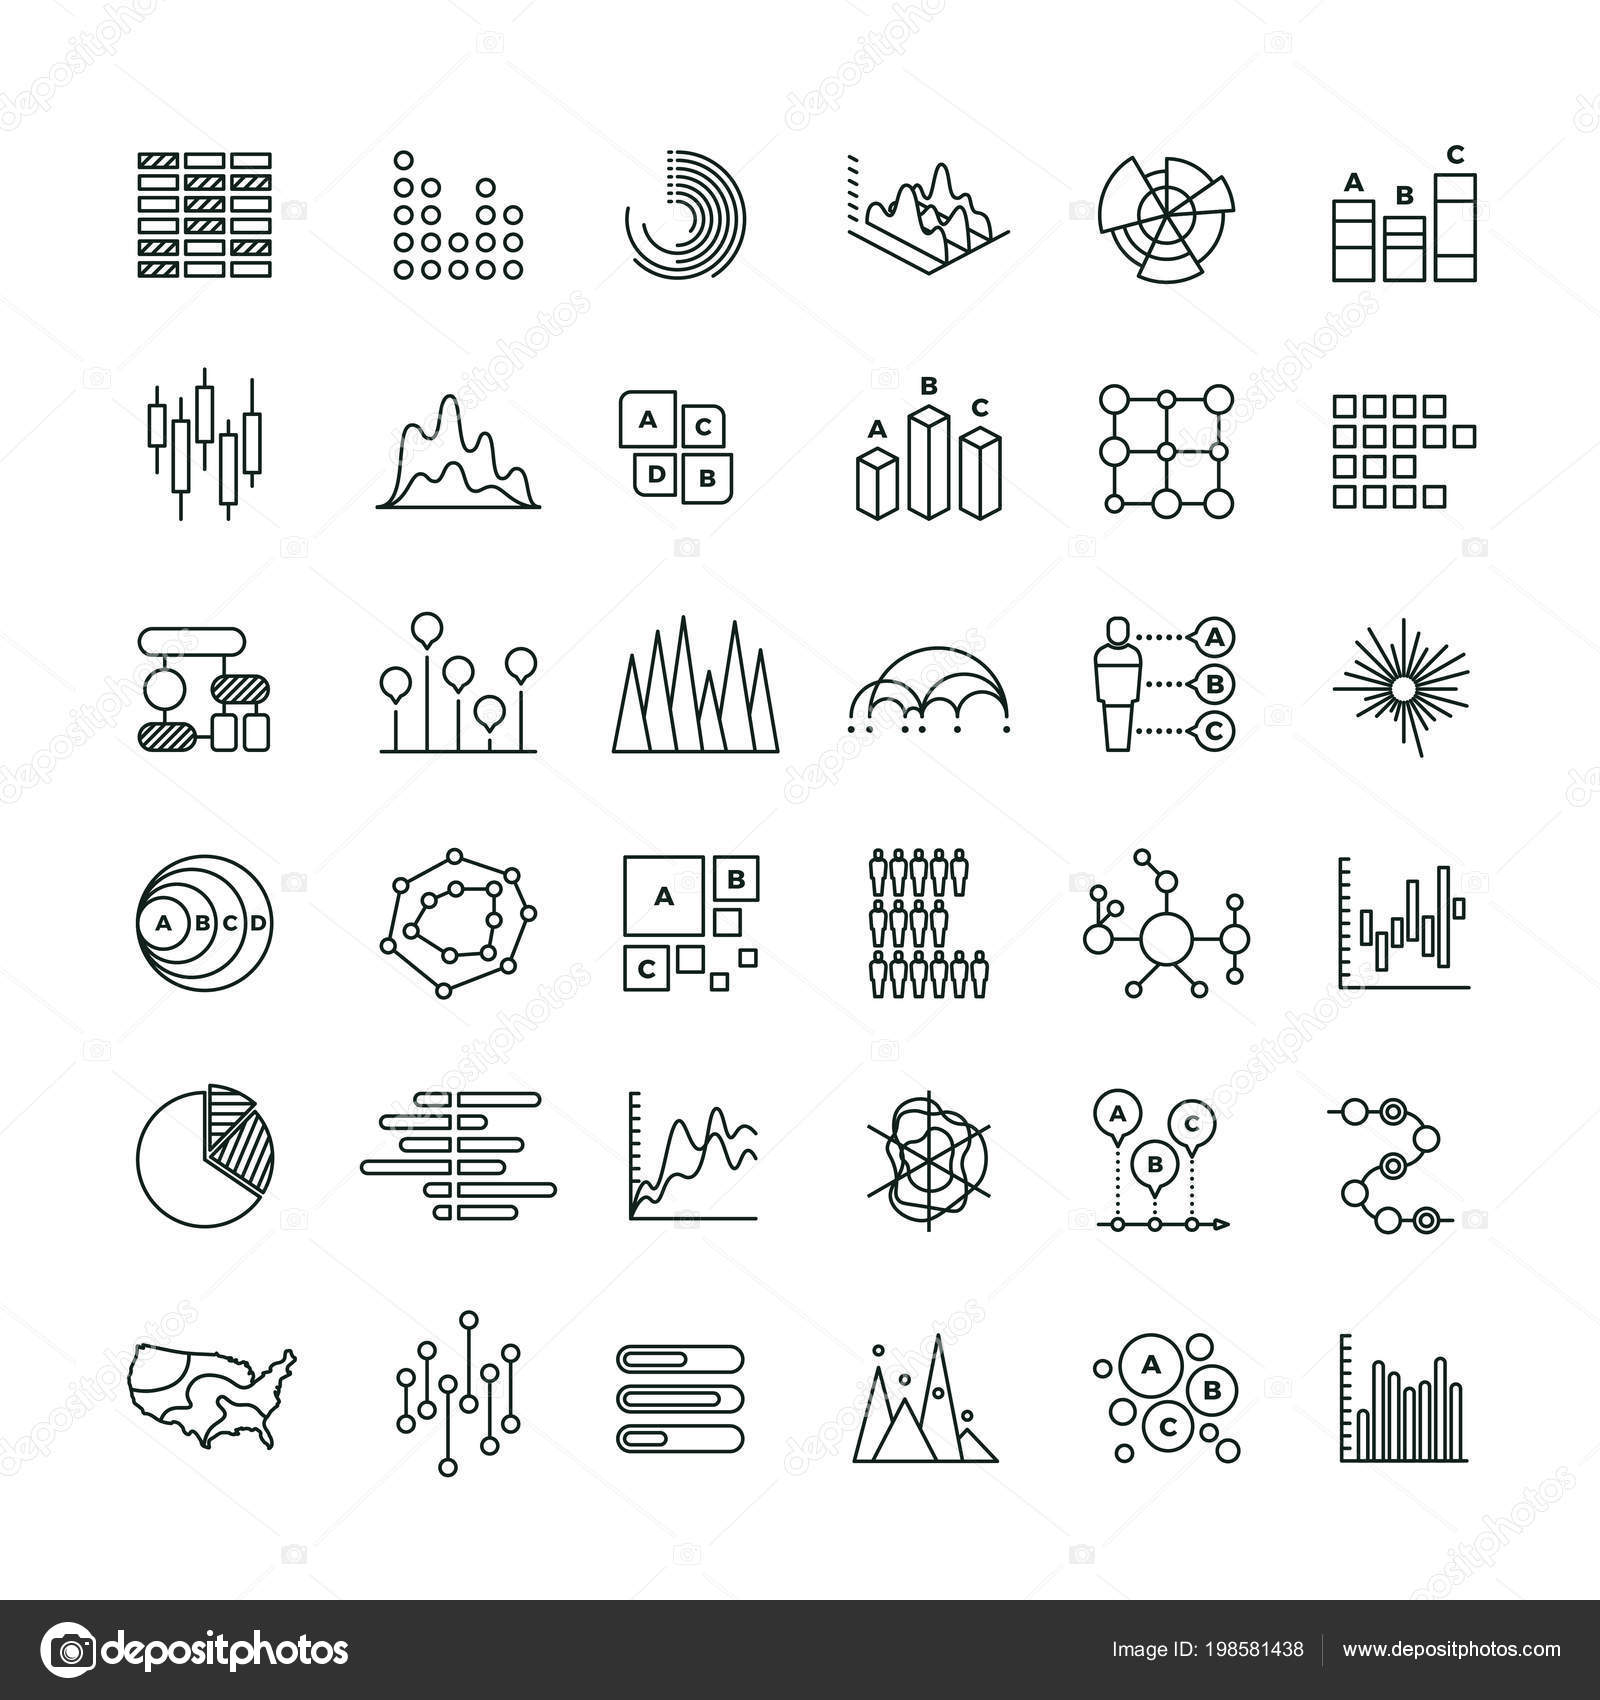 Stock Icons Graphs Charts And Statistics